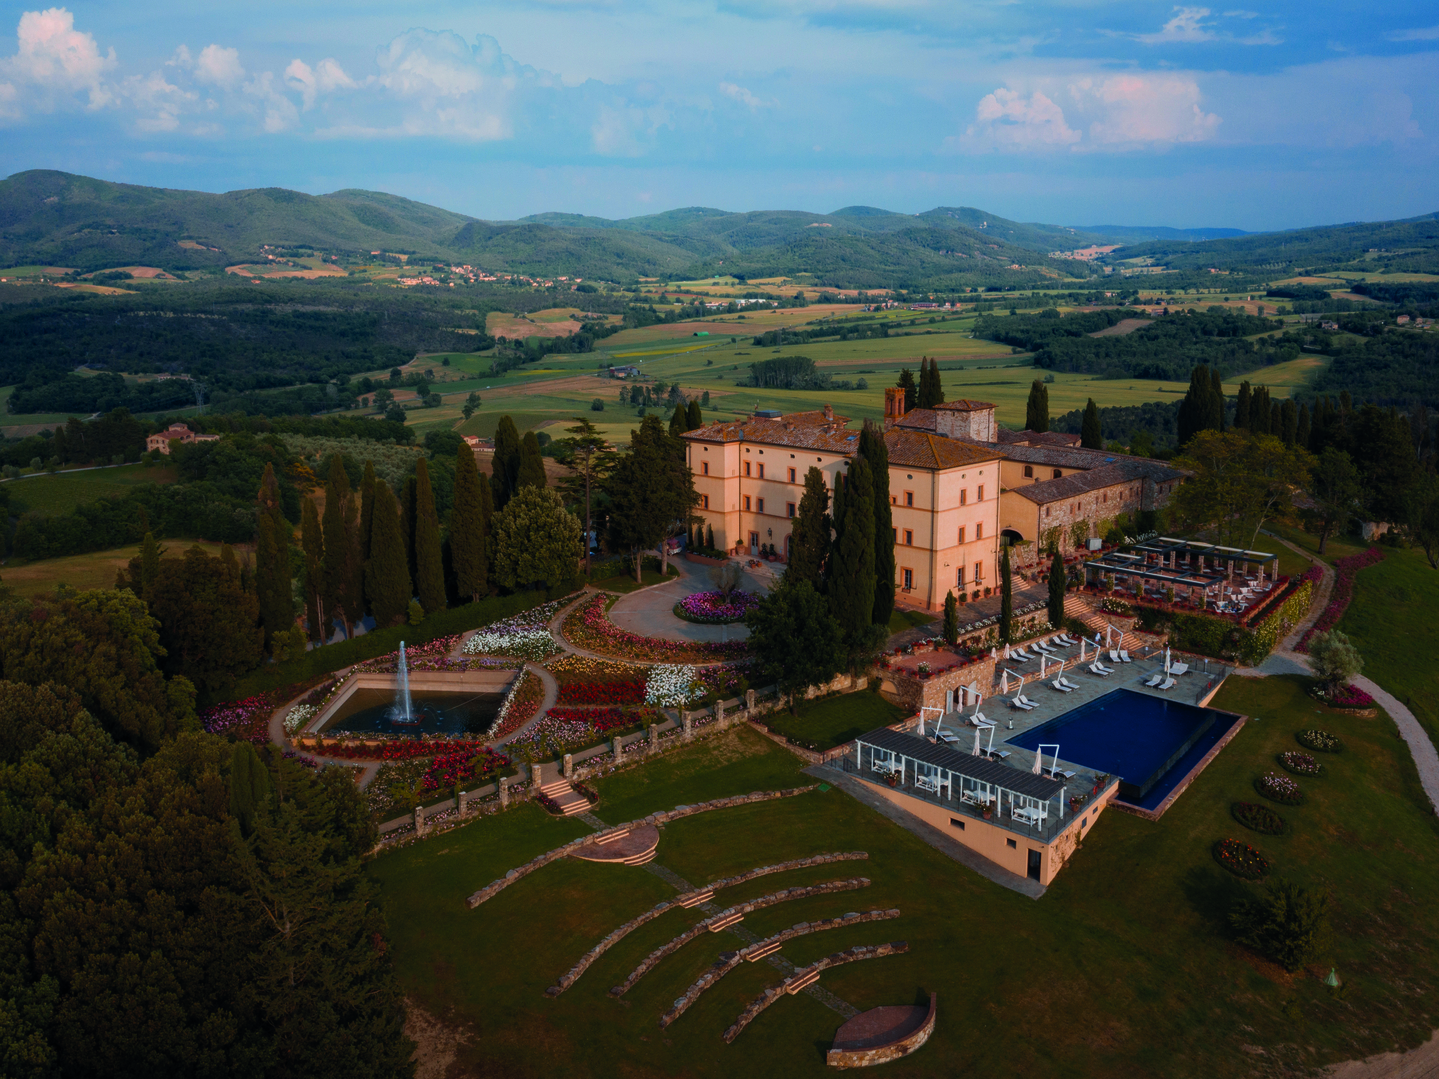 castello-di-casole-tuscany/></noscript>
A stunningly restored hilltop castle set in beautifully manicured grounds of 4,200sqm. This five-star boutique, all-suite hotel effortlessly combines Old World Tuscan charm with modern luxuries, and sublime comfort with elegance and sophistication.

At a glance…

ACCOMMODATION 39 rooms and suites
DINING Traditional restaurant with Tuscan dishes
FEATURES Pool, Essere Spa, vineyard and olive grove
ACTIVITIES Biking, horseback riding, golf, truffle hunting and more
EVENTS Indoor and outdoor venues including an ancient amphitheatre, wine cellar and chapel

</div>
</div>

<div class=